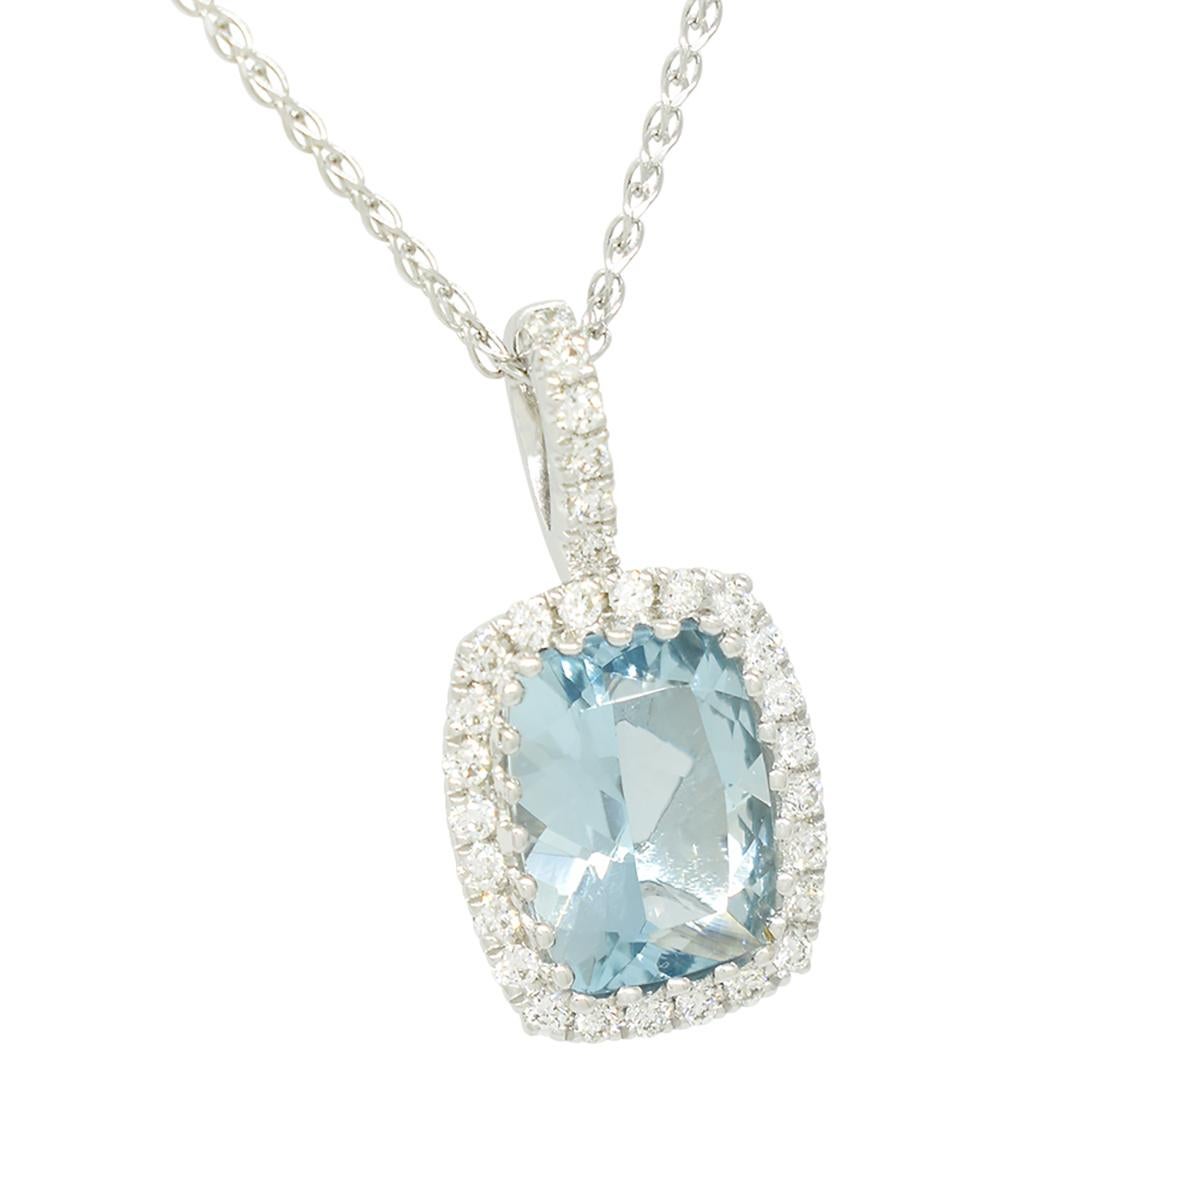 Aquamarine and diamond necklace made in 14K white gold with a stunning 1.64 carats cushion cut genuine aquamarine and 30 round cut diamonds. Take a look to the fine and tiny prongs holding the aquamarine, they create an exquisite frame for the